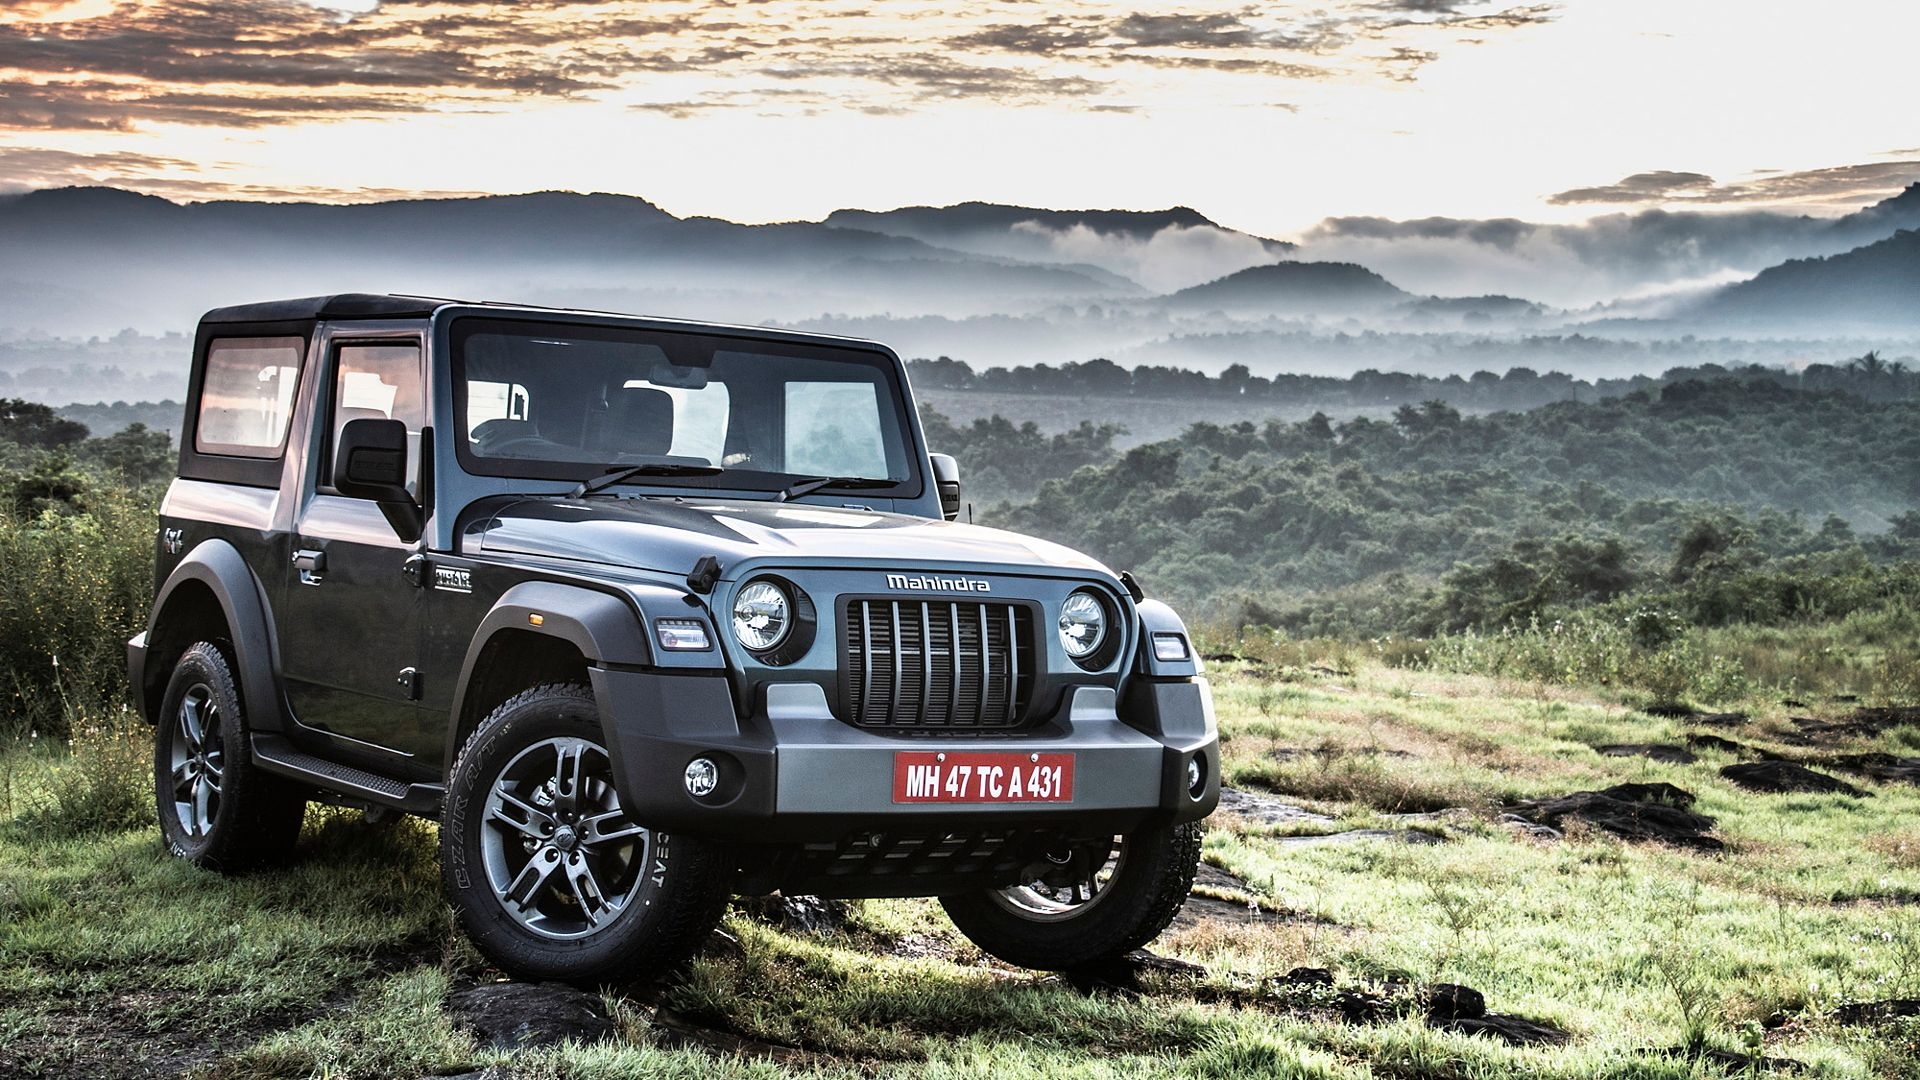 Fiat Chrysler Pursues Mahindra & Tries to block M&M's 4x4 in Jeep Trademark Case news